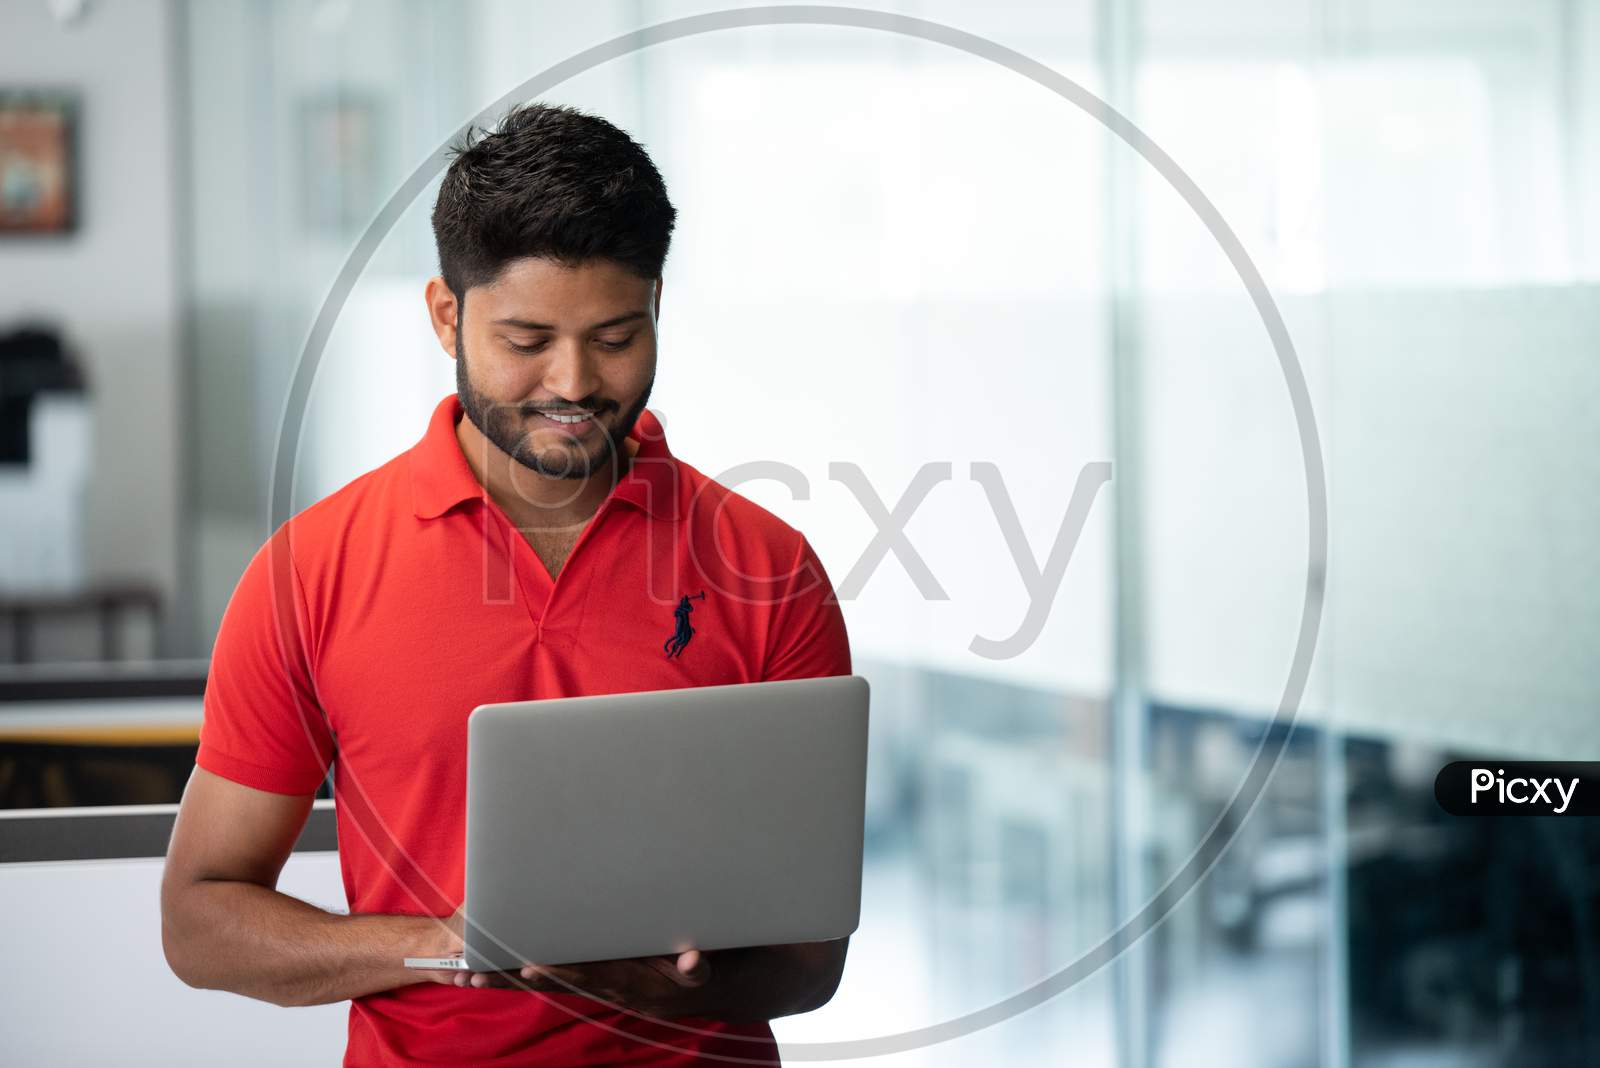 Indian Male Businessman  Working On Laptop At an Office Indoor